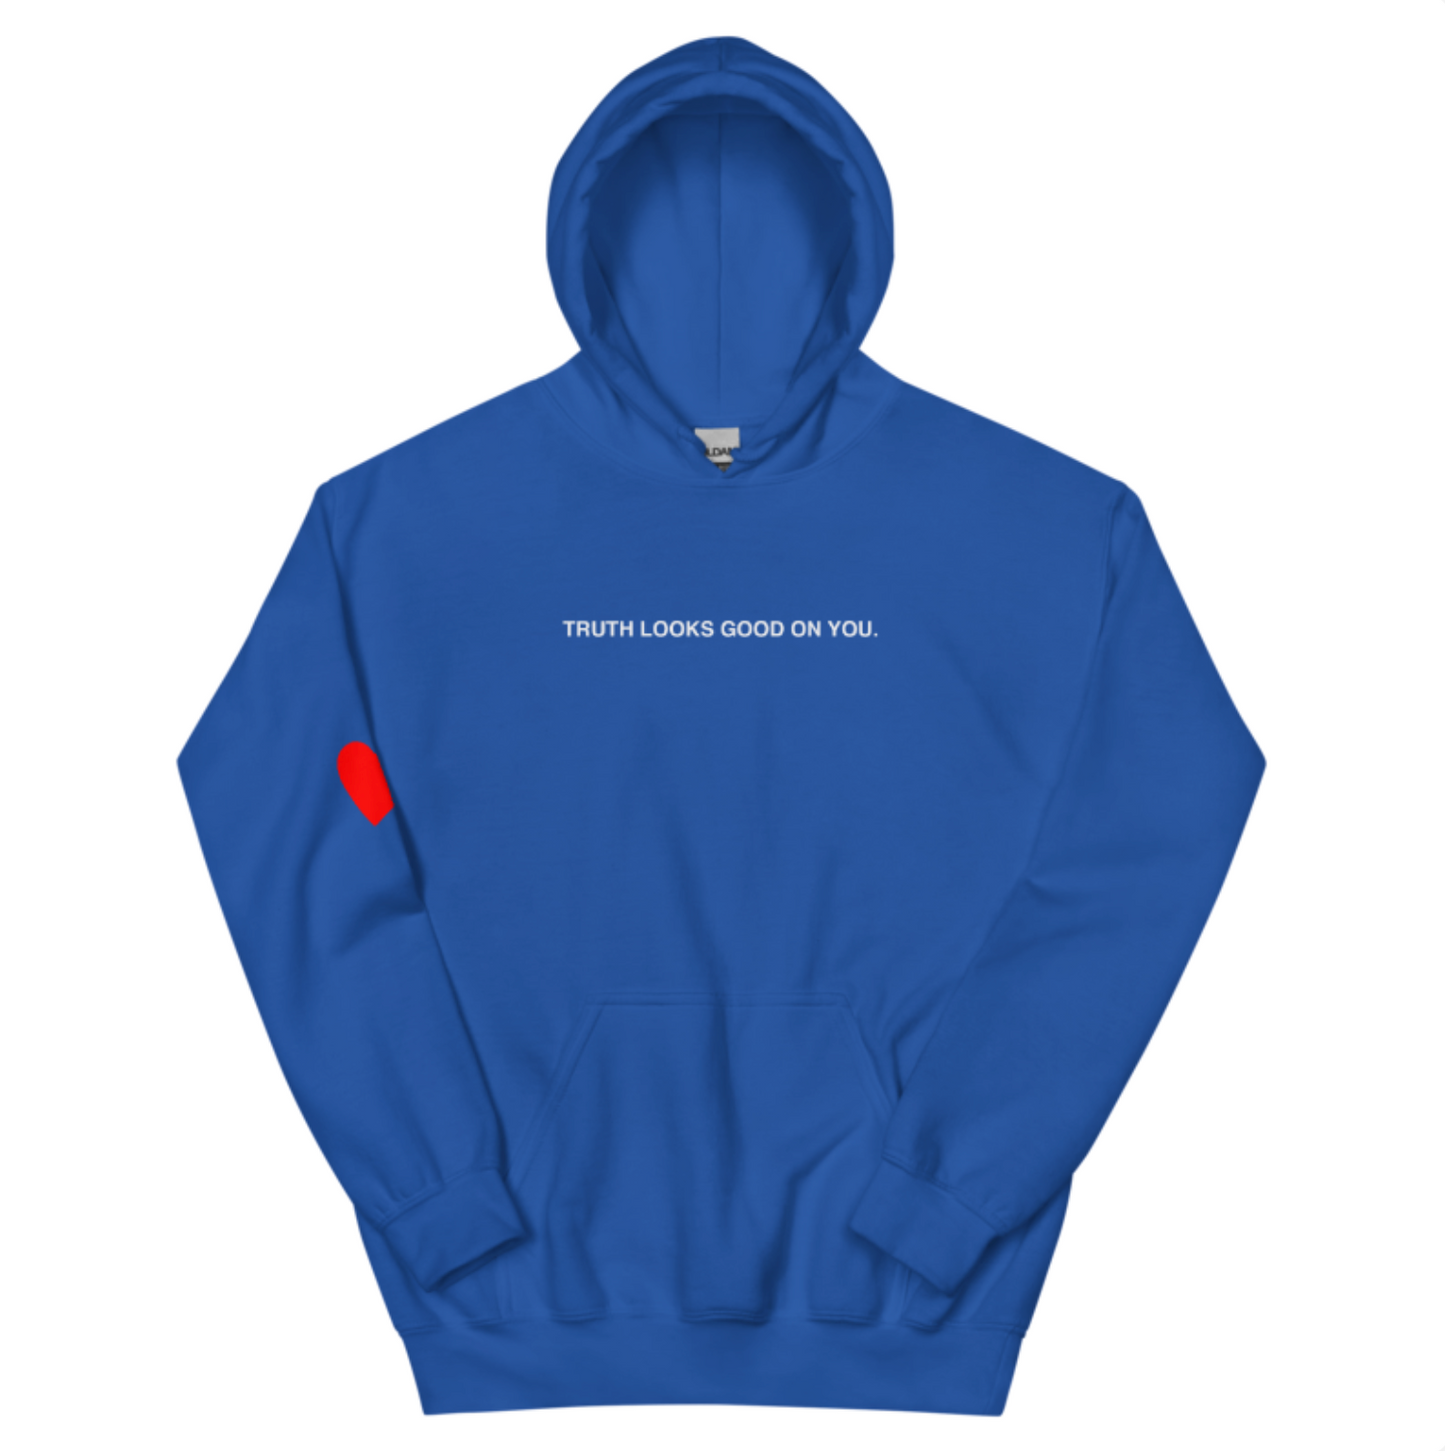 Clothes Are So Obnoxious (heart on your sleeve) HOODIE